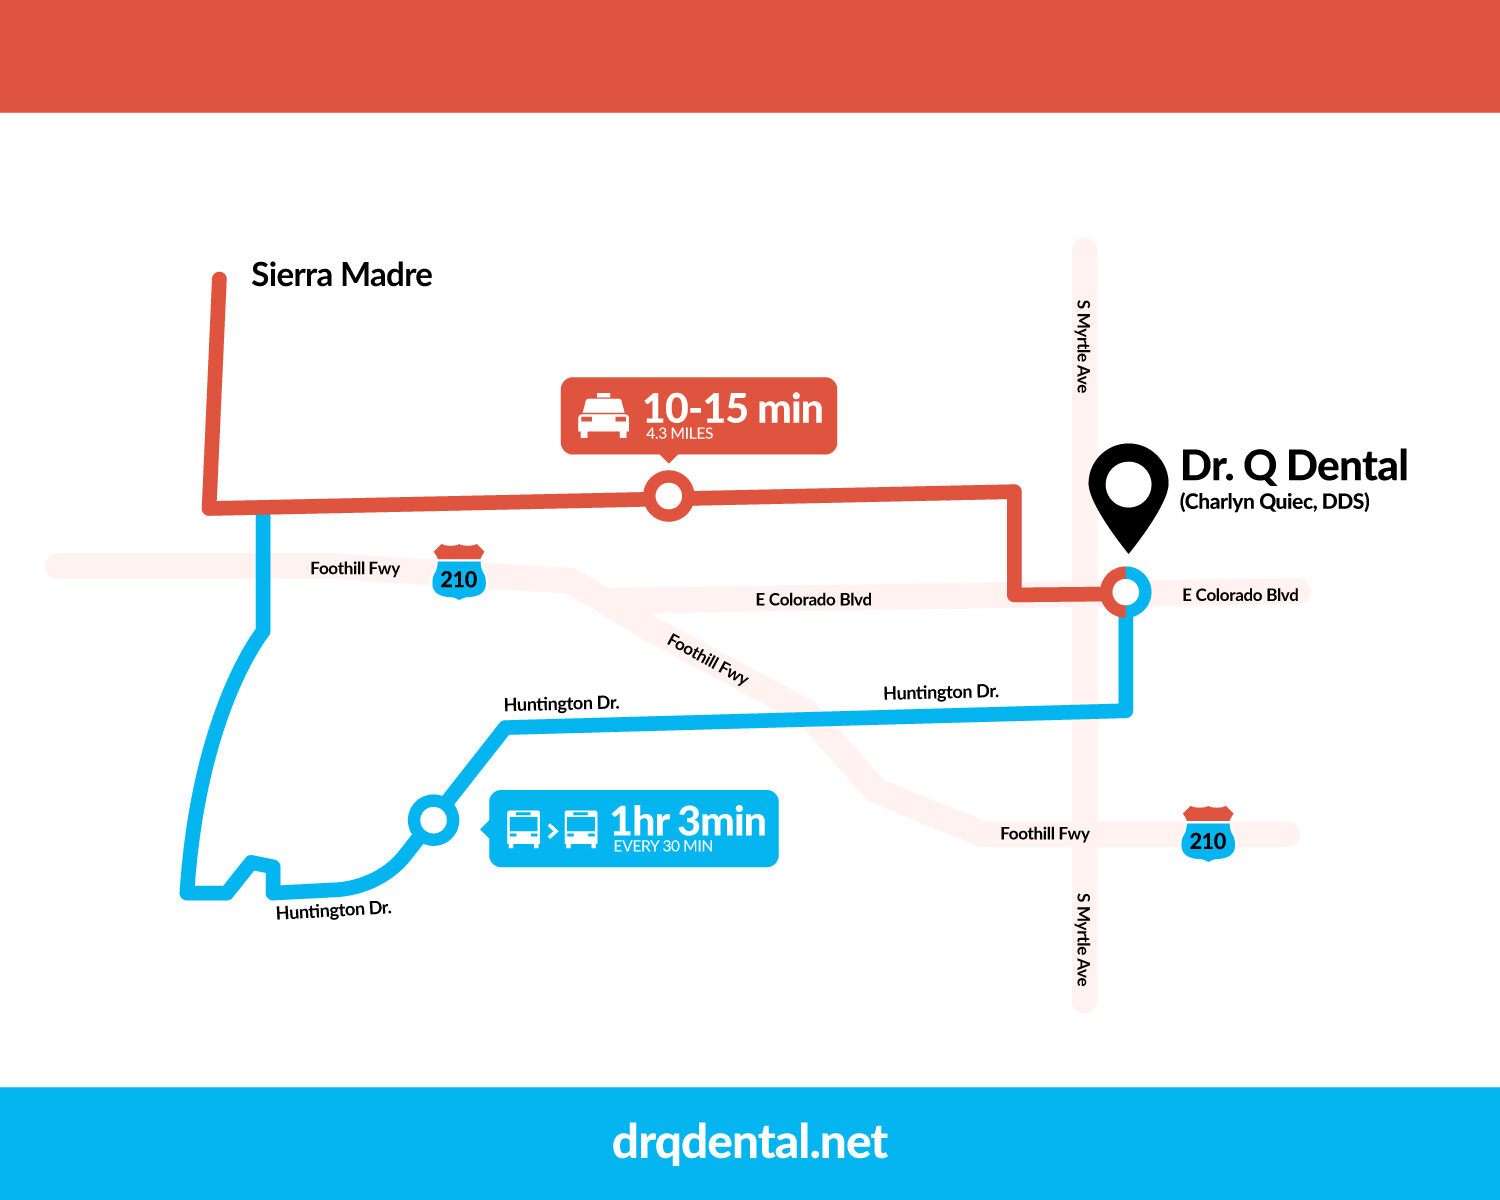 Directions to Dr. Q Dental from Sierra Madre